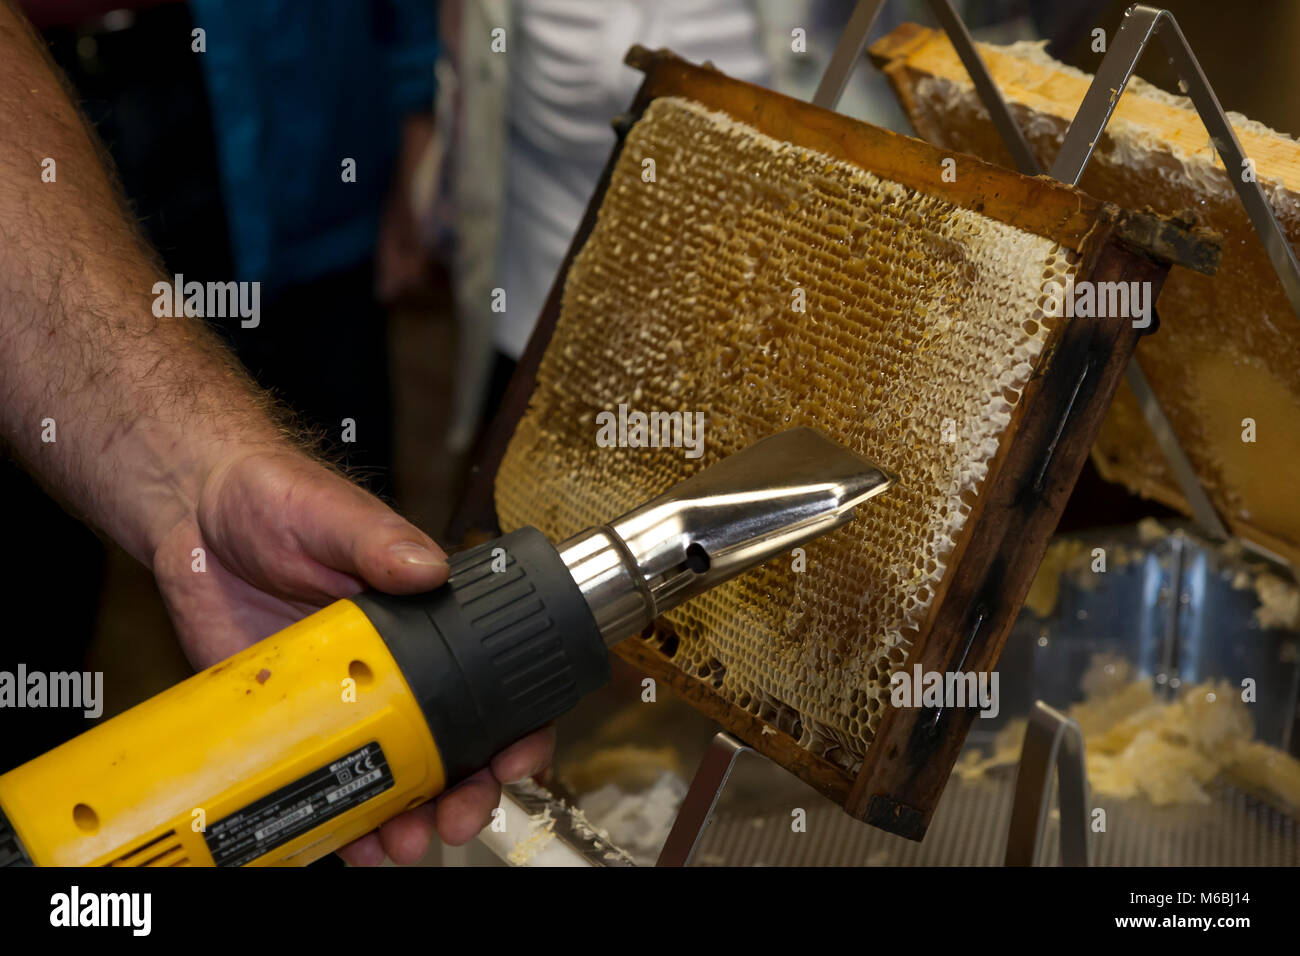 A honeycomb is uncapped with a hot air dryer. Honeycomb is heated with a Blower to melt the wax cover of the cells Stock Photo